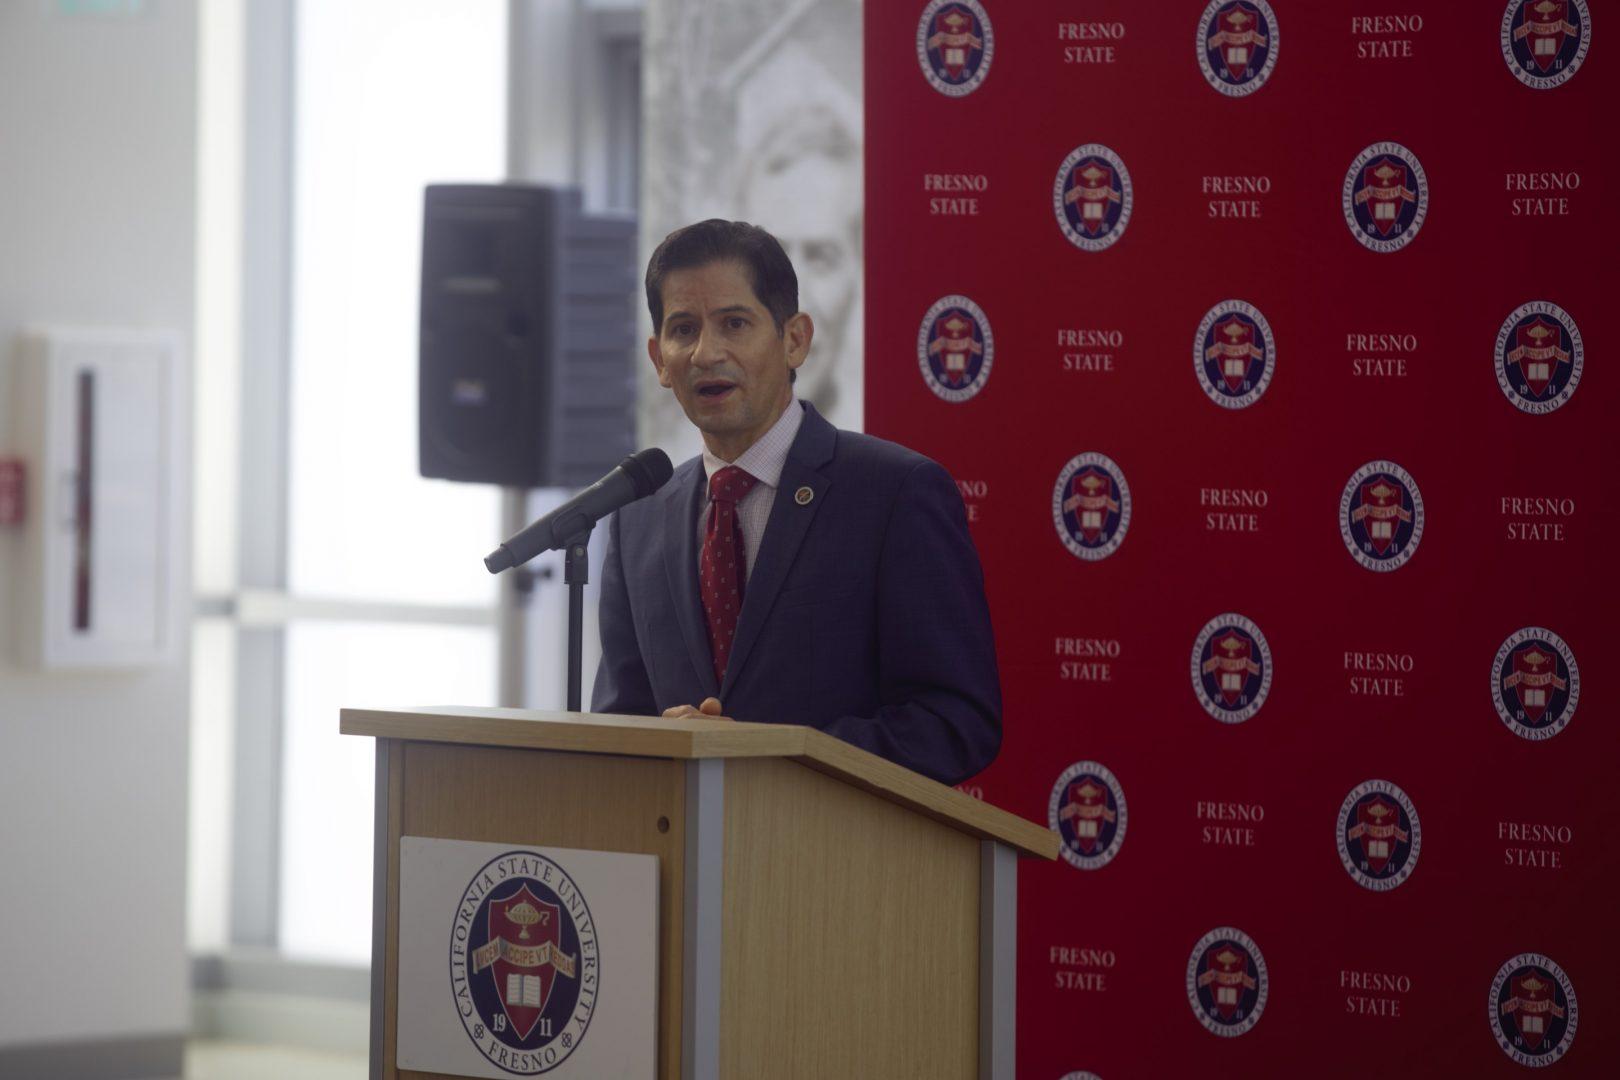 Fresno State President SaÃºl JimÃ©nez-Sandoval during an open forum on March 24, 2021 at Room 118 in the North Gym . (JesÃºs Cano/The Collegian)